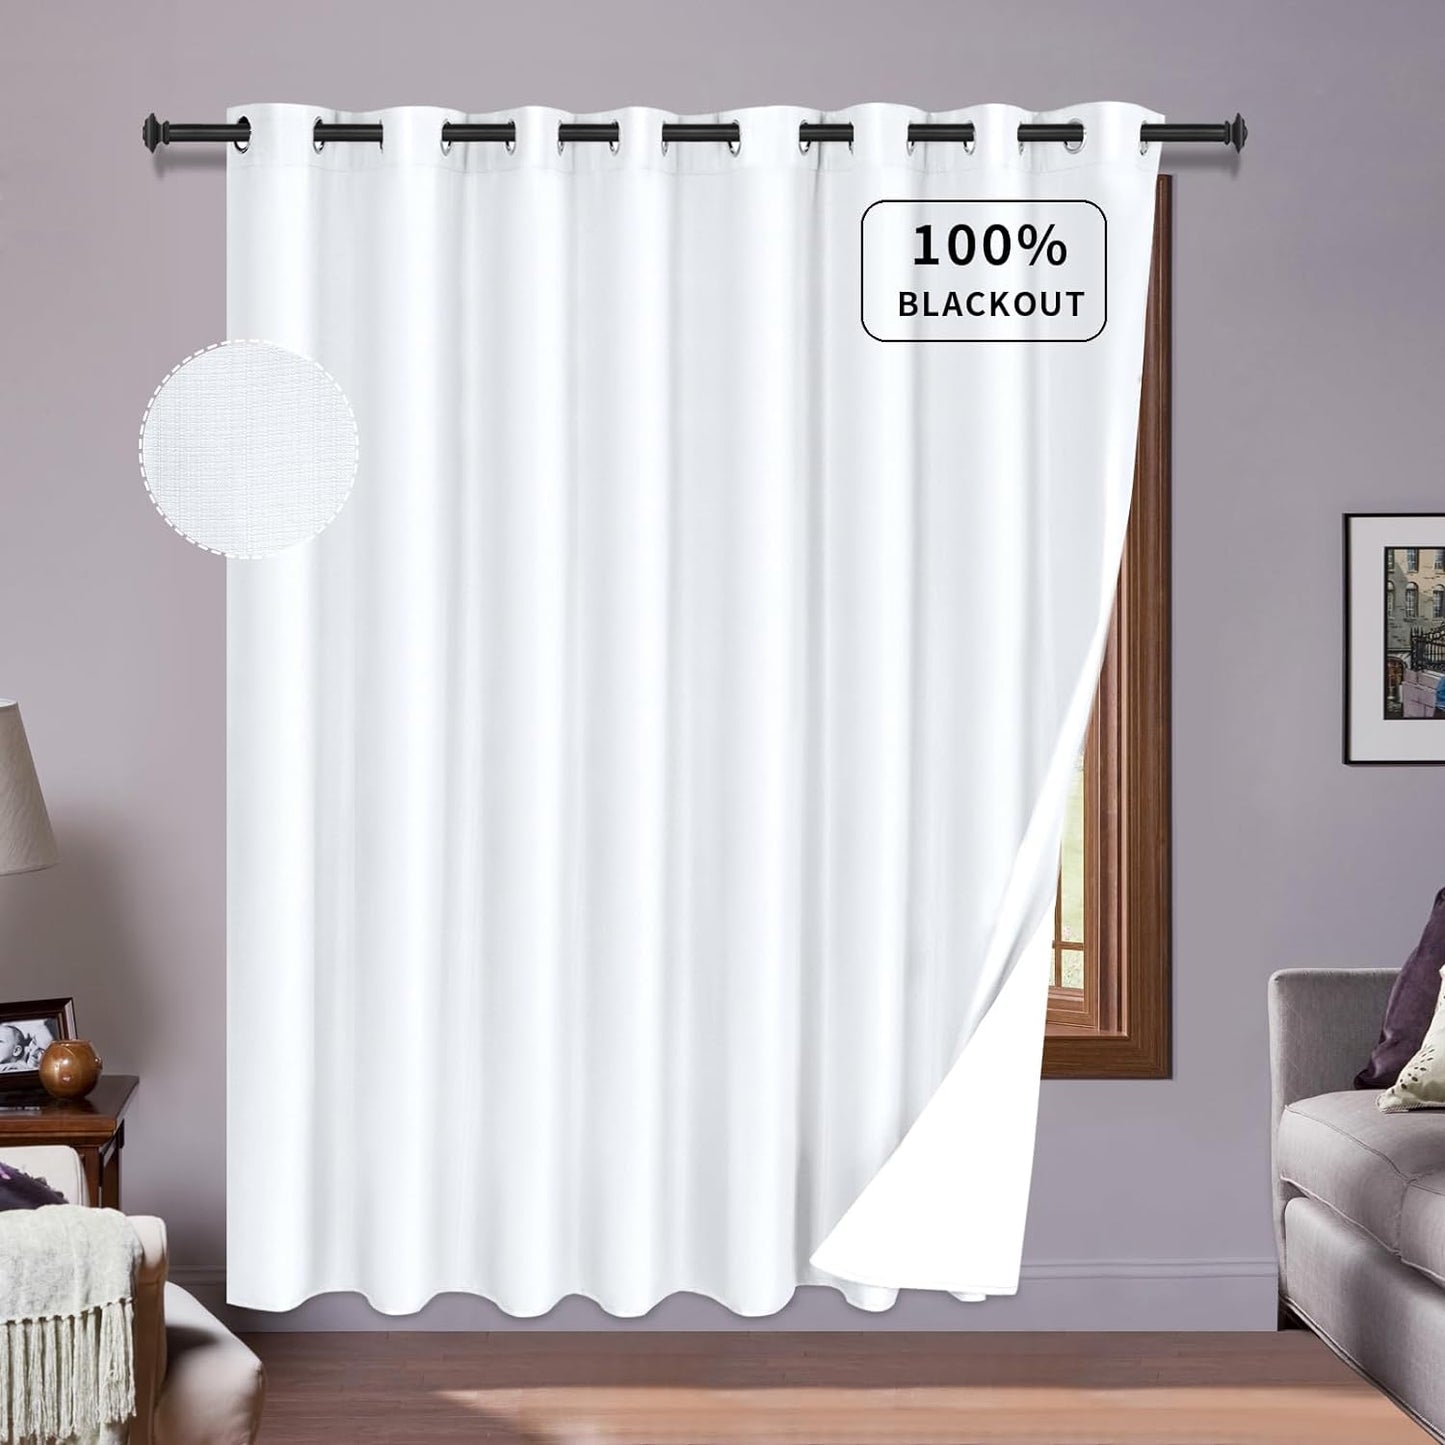 Purefit White Linen Blackout Curtains 84 Inches Long 100% Room Darkening Thermal Insulated Window Curtain Drapes for Bedroom Living Room Nursery with Anti-Rust Grommets & Energy Saving Liner, 2 Panels  PureFit White 100"W X 84"L 